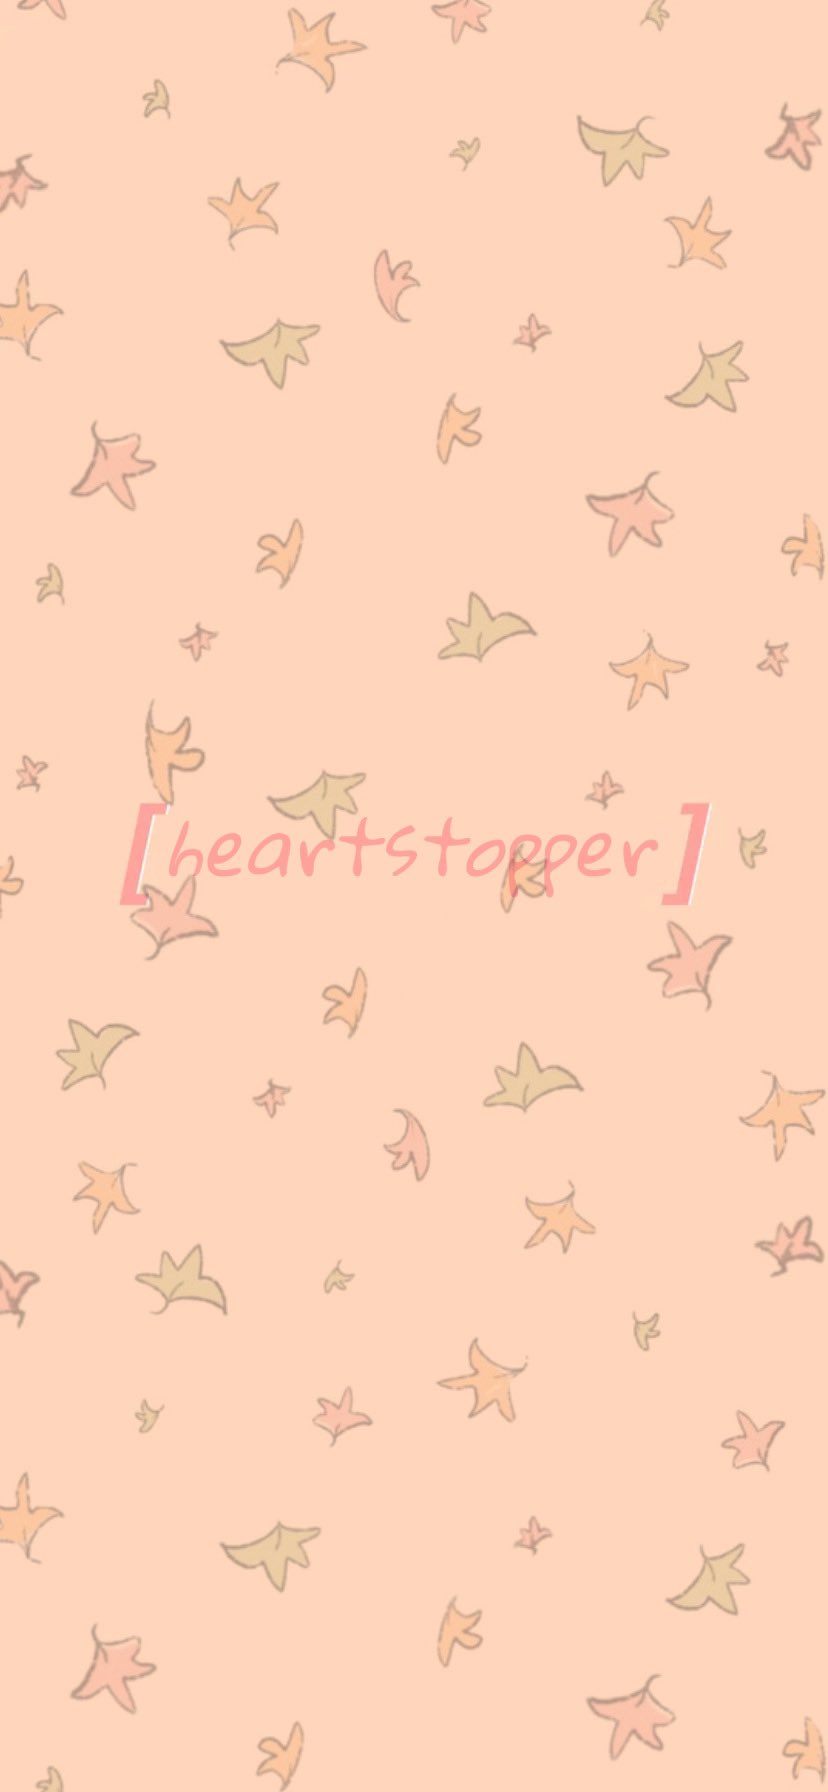 azi ^_^ (eliza) heartstopper fans i made this wallpaper!! feel free to ss and use :) #Heartstopper